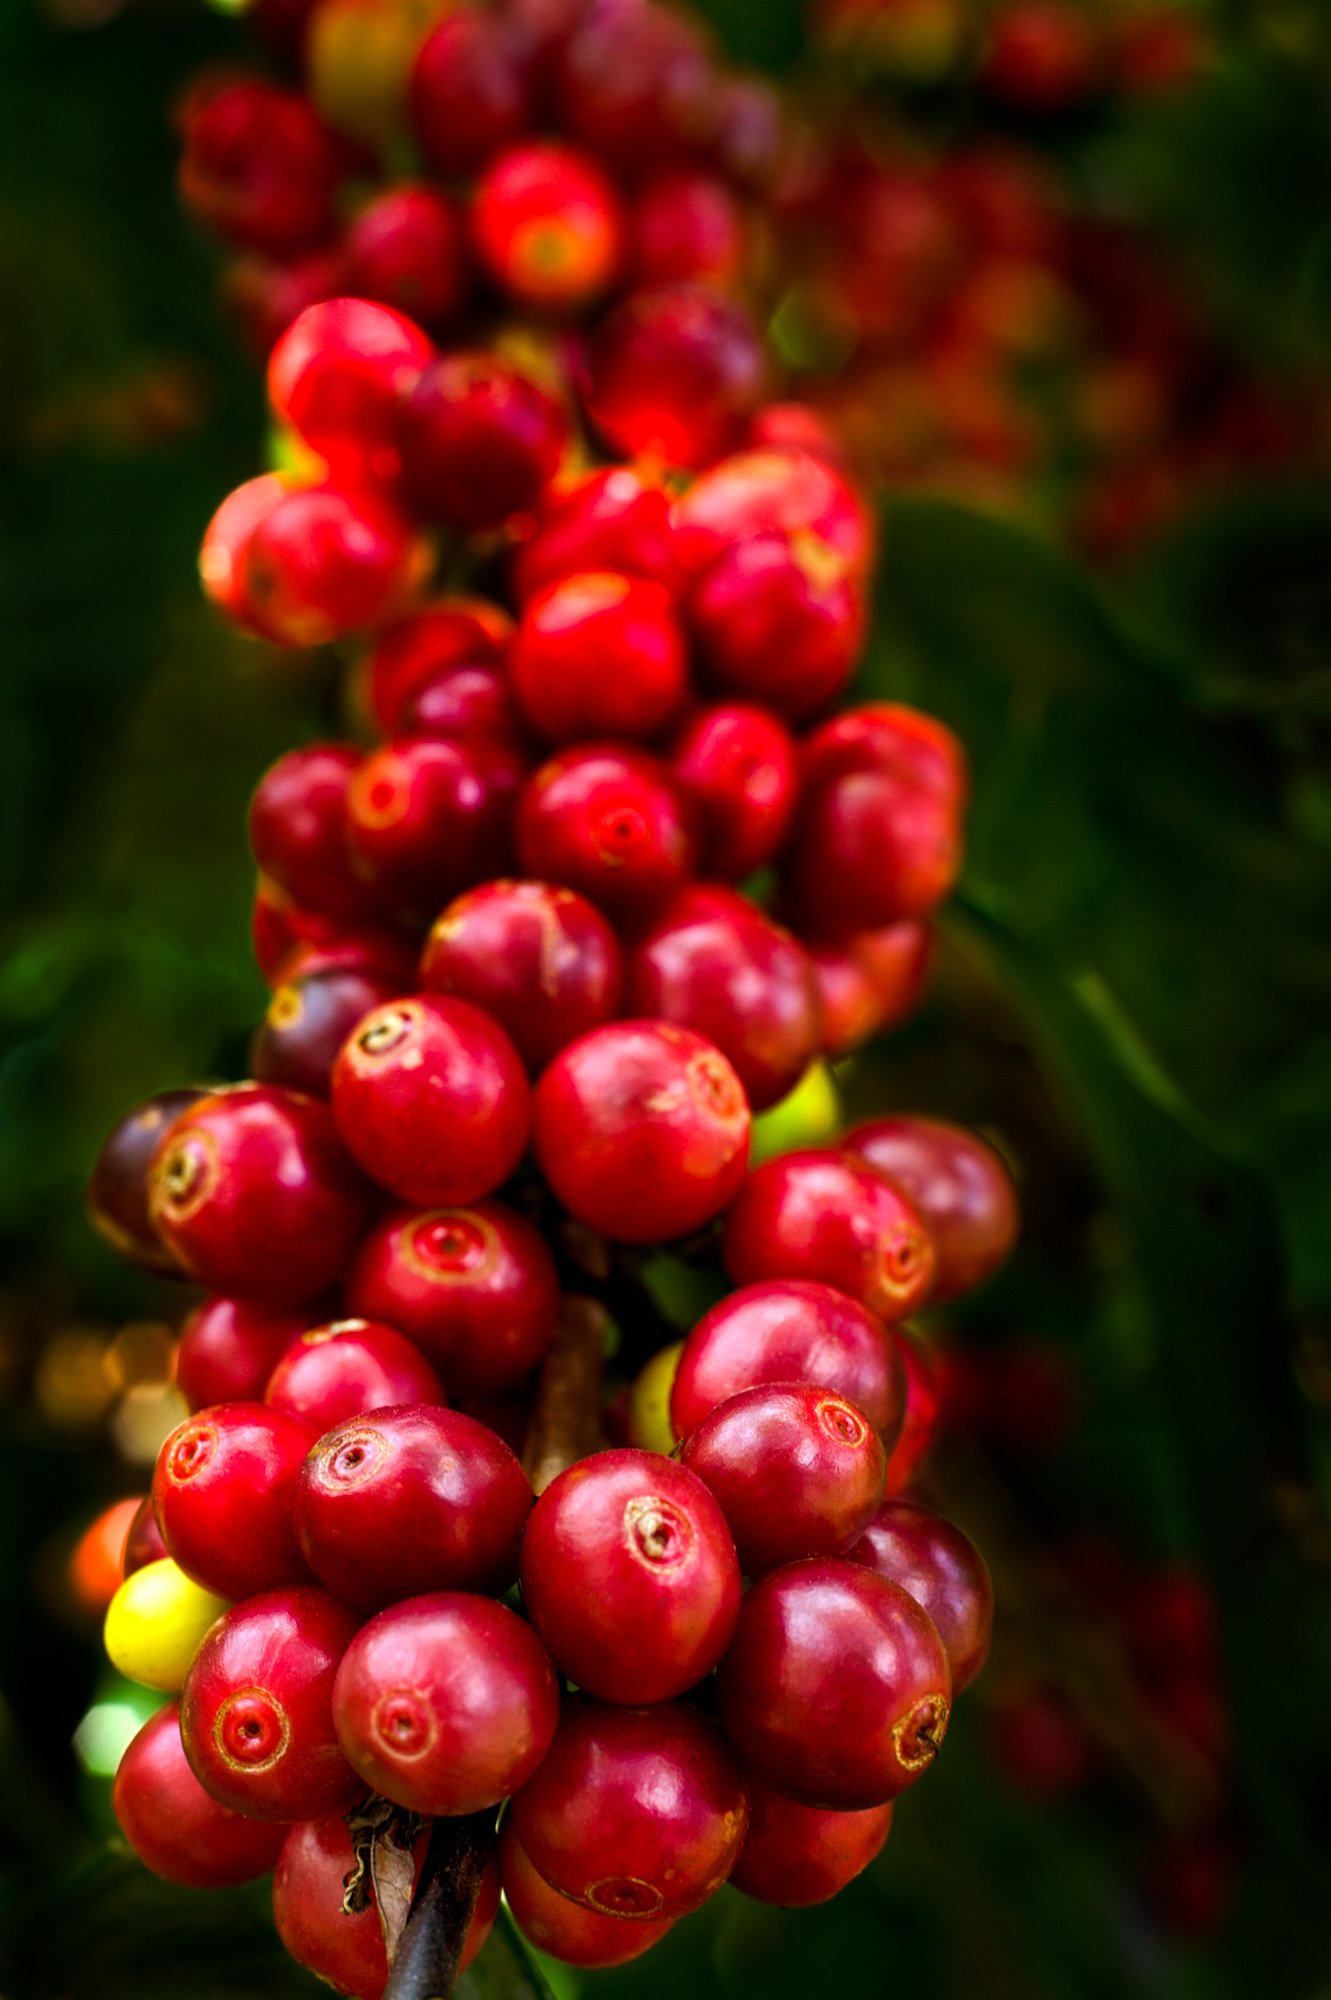 Ripe arabica coffee cherries close up to illustrate how to make photo stories